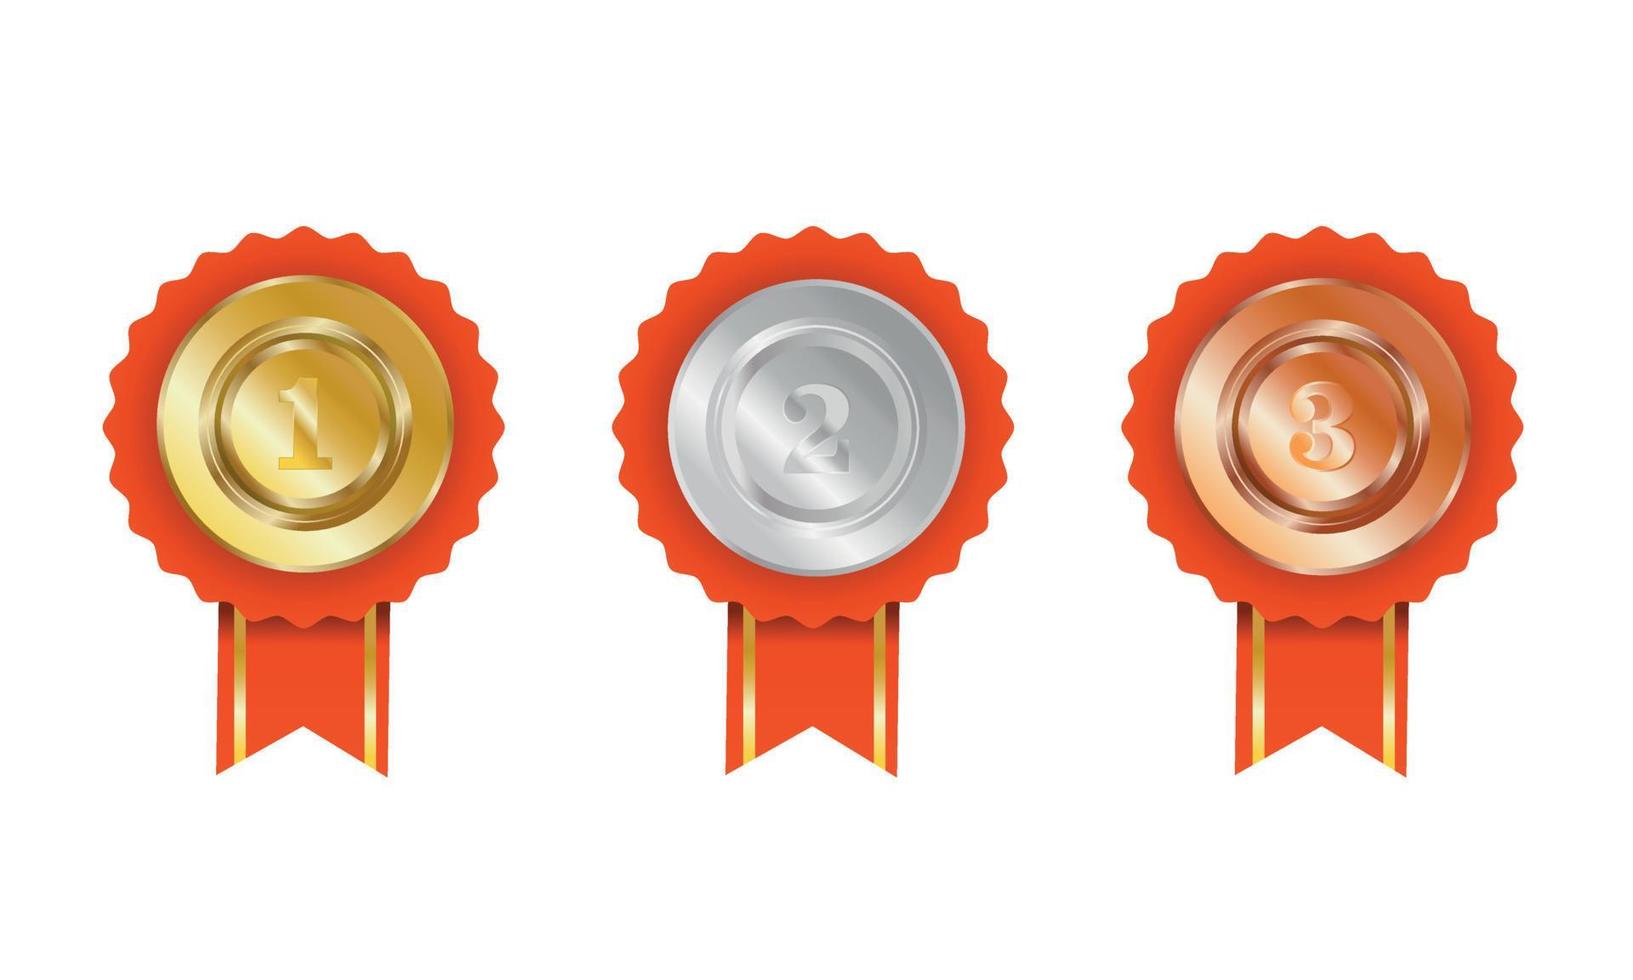 Badge with ribbons. Gold, silver, bronze. Vector illustration